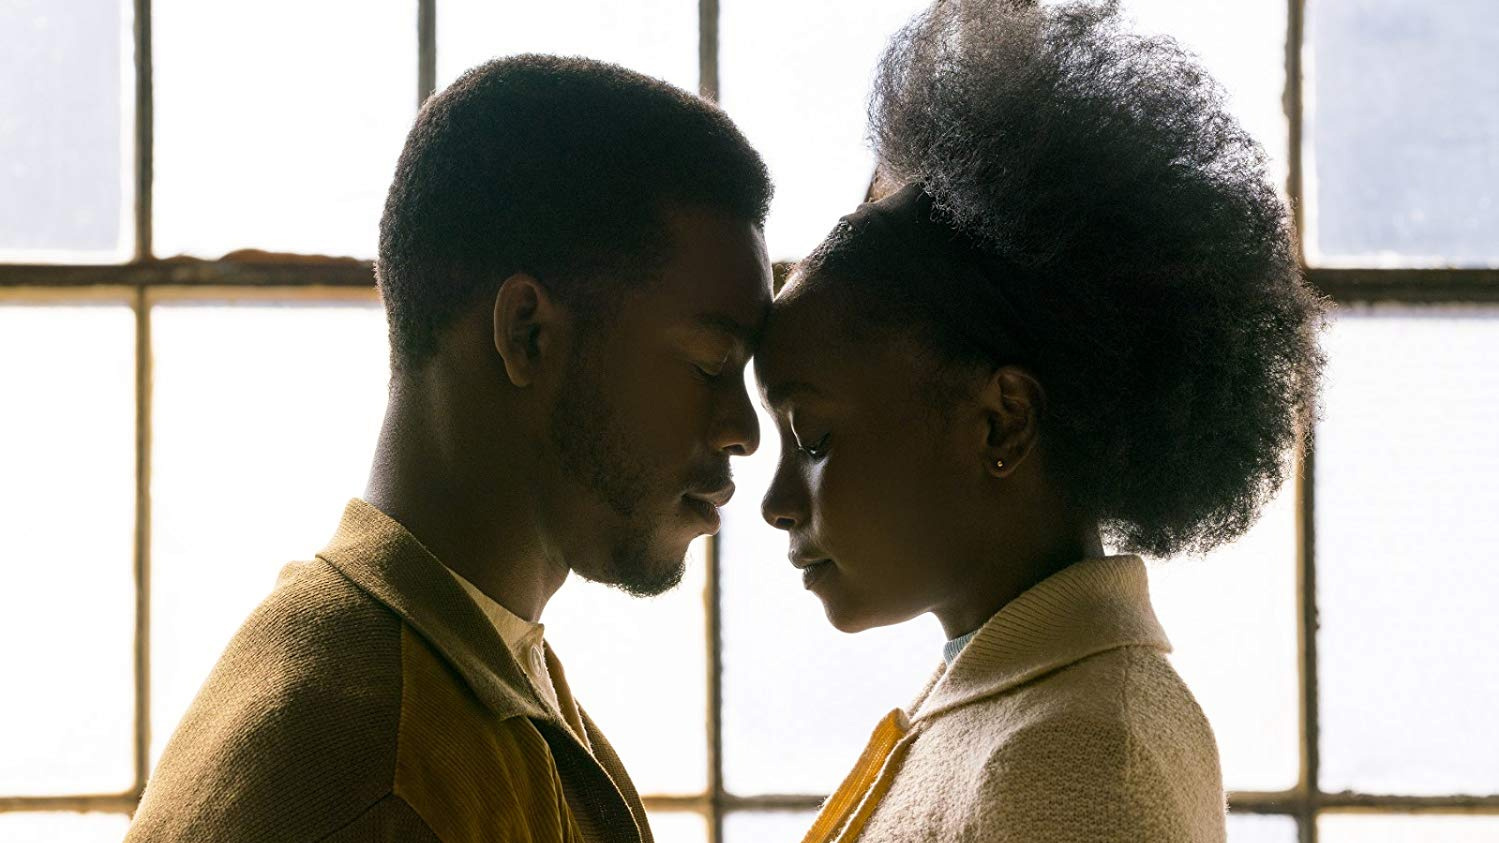 If Beale Street Could Talk image from the movie